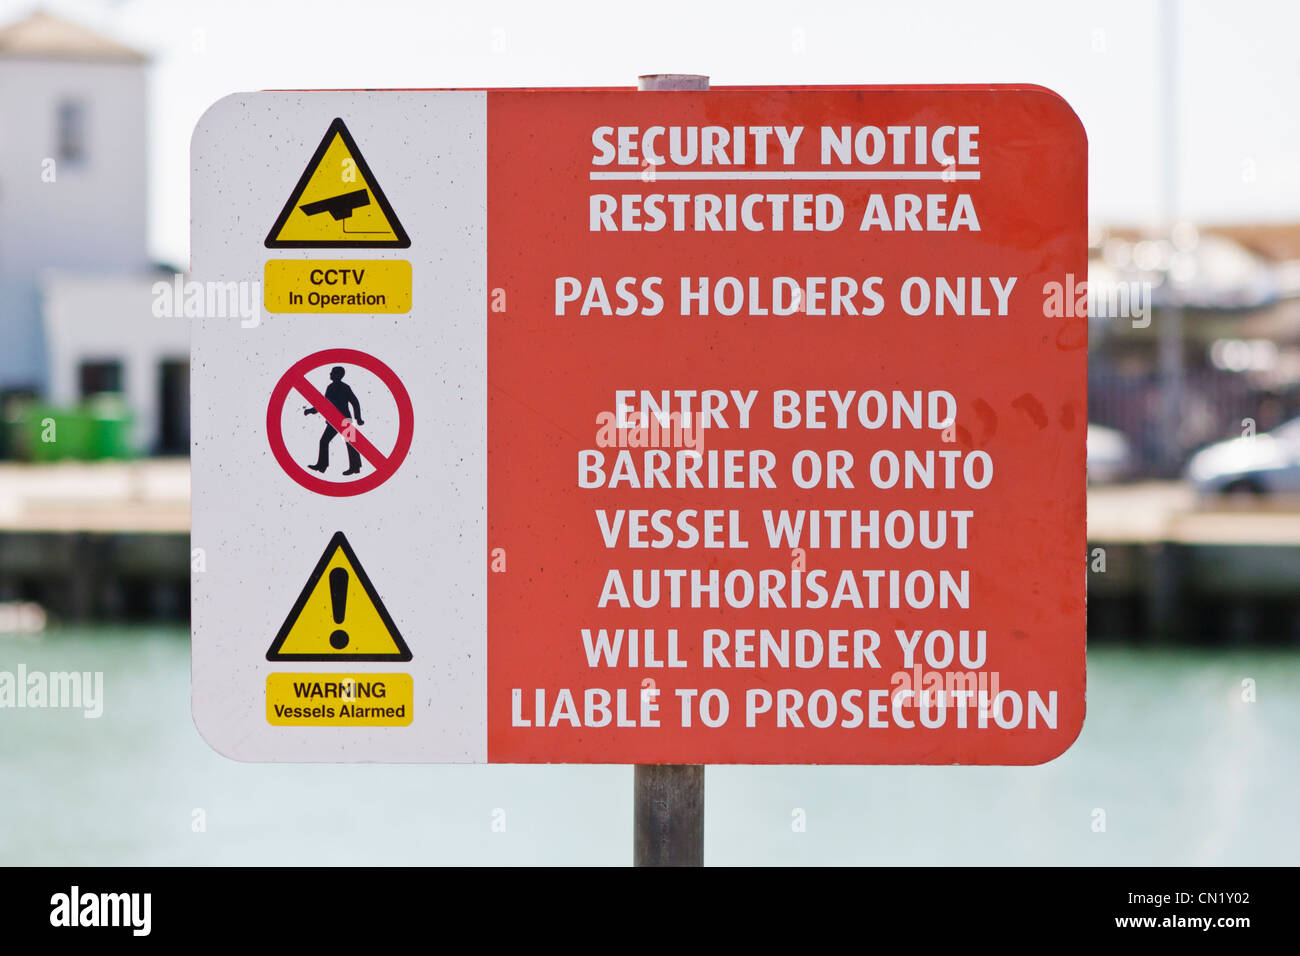 Security warning sign restricted area Stock Photo